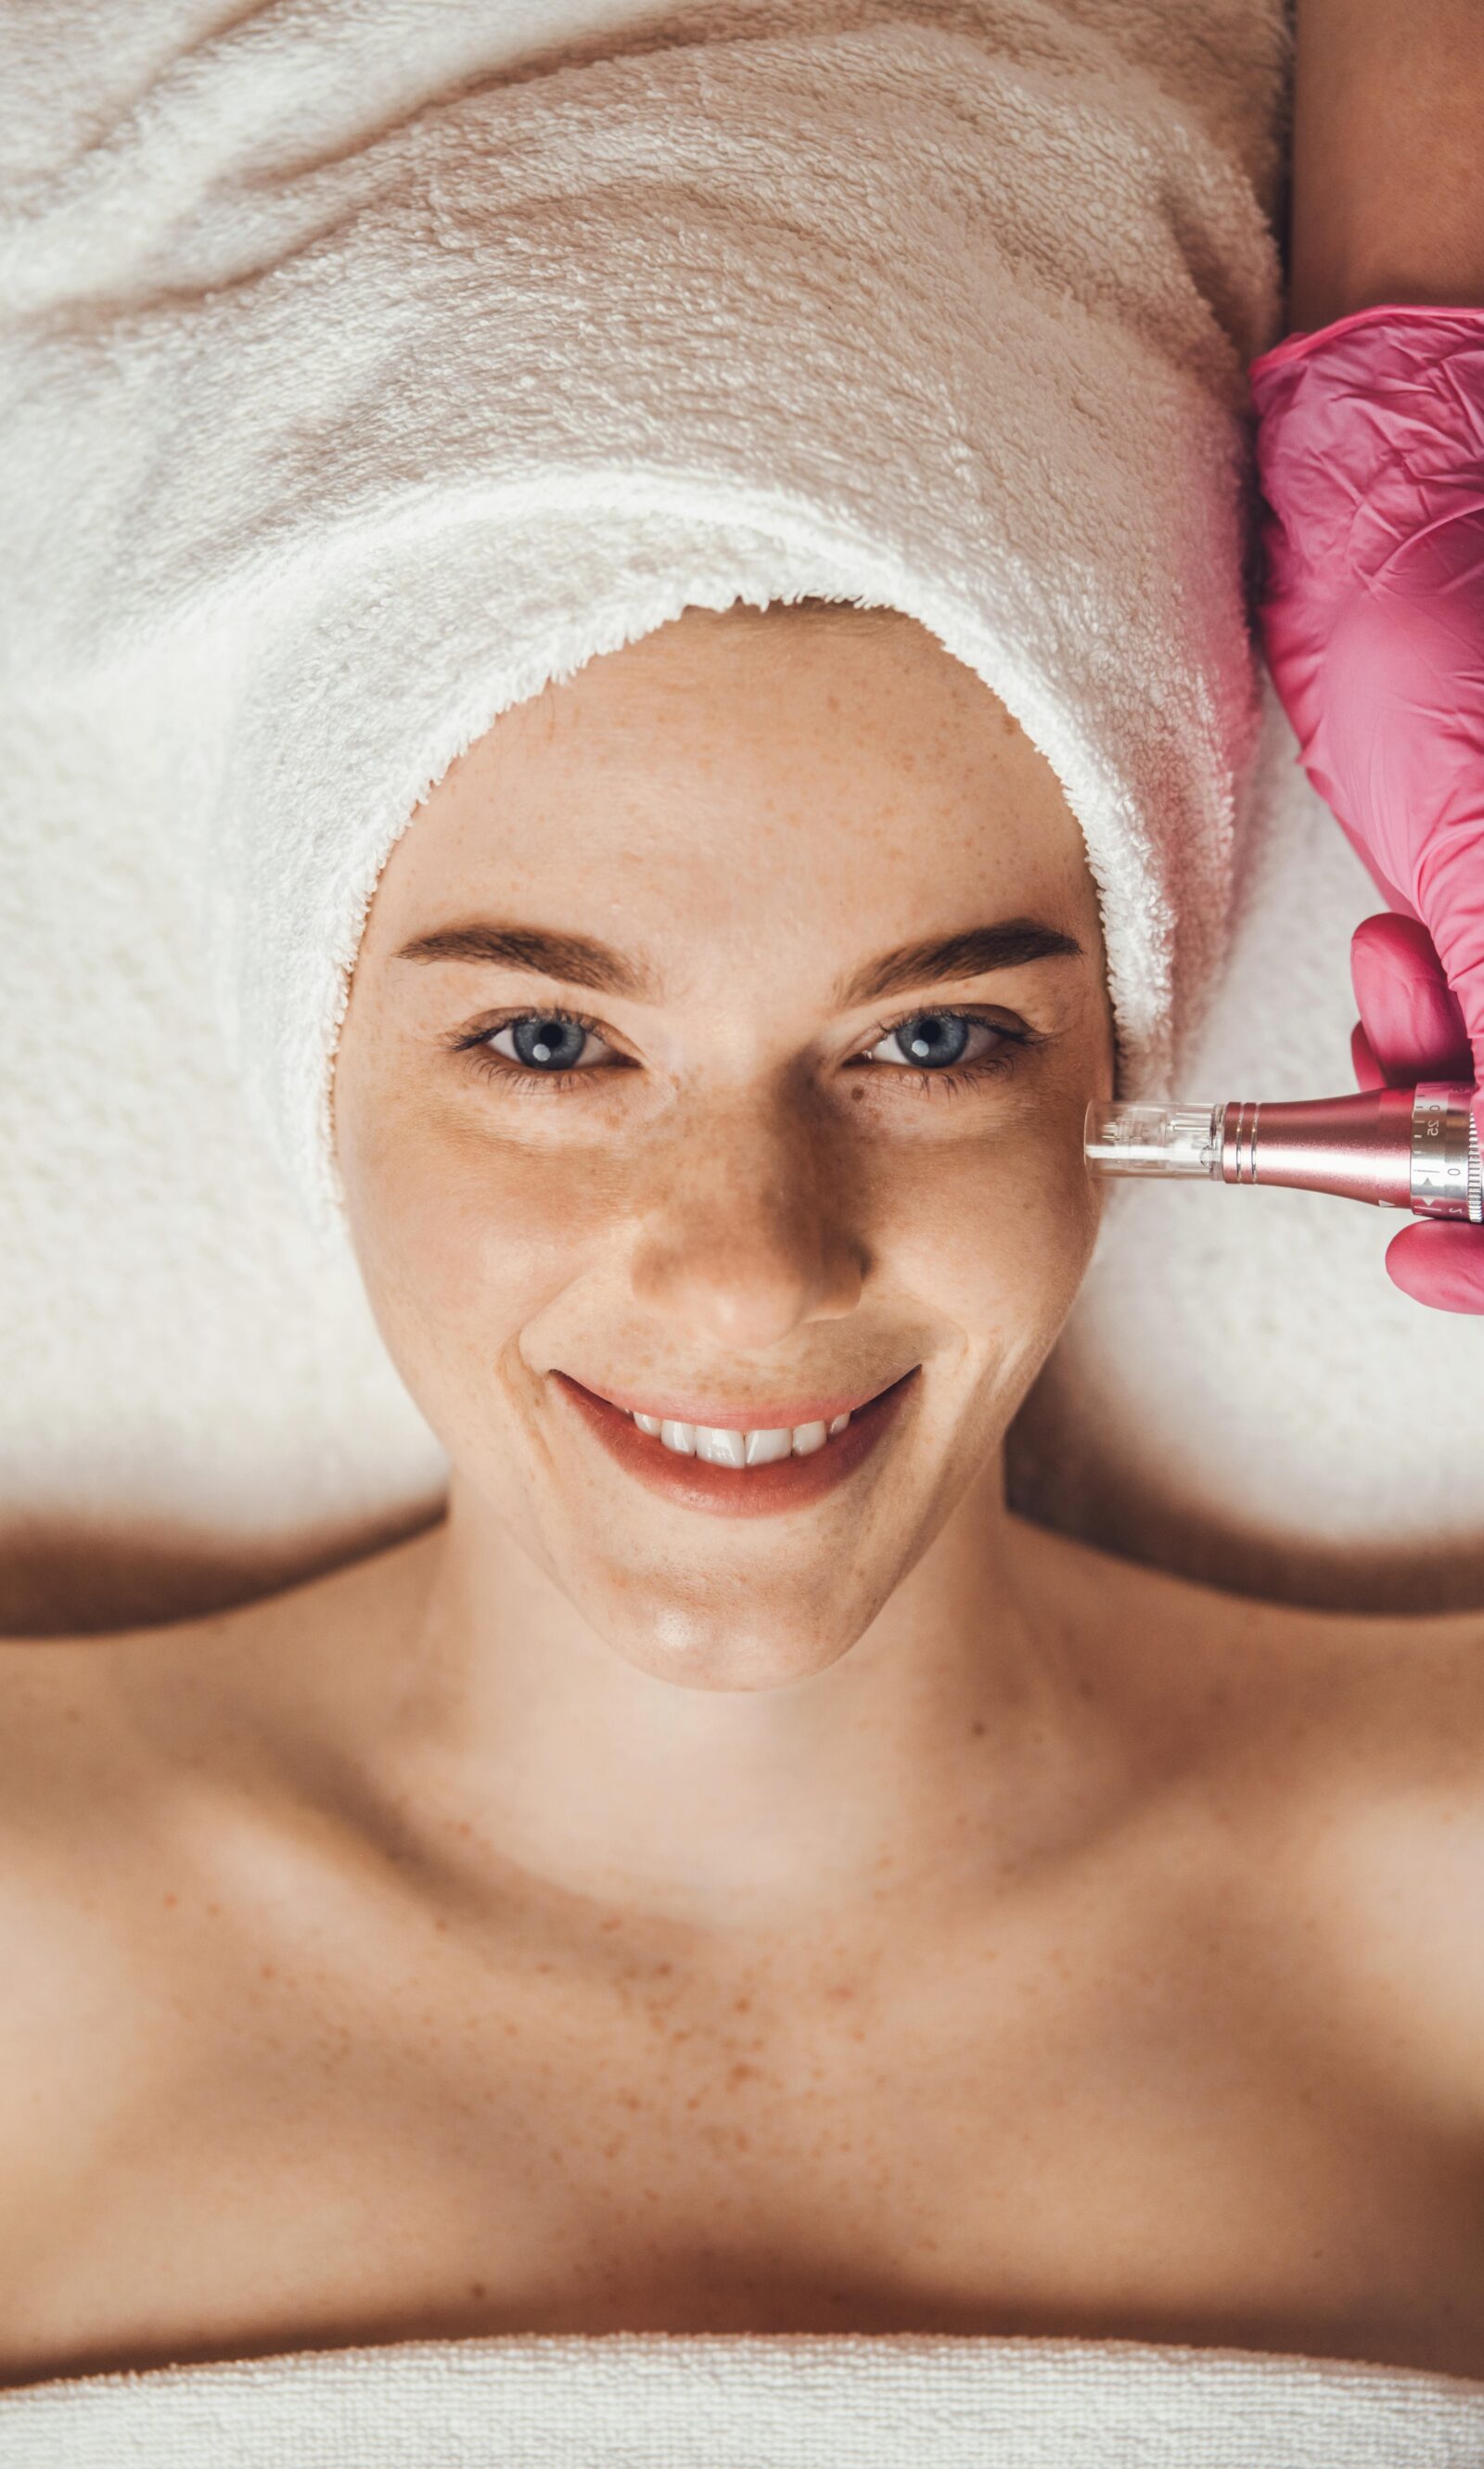 Top view portrait of female face looking at camera getting microdermabrasion procedure in a beauty spa salon. Dermatology, cosmetology. Health care, beauty